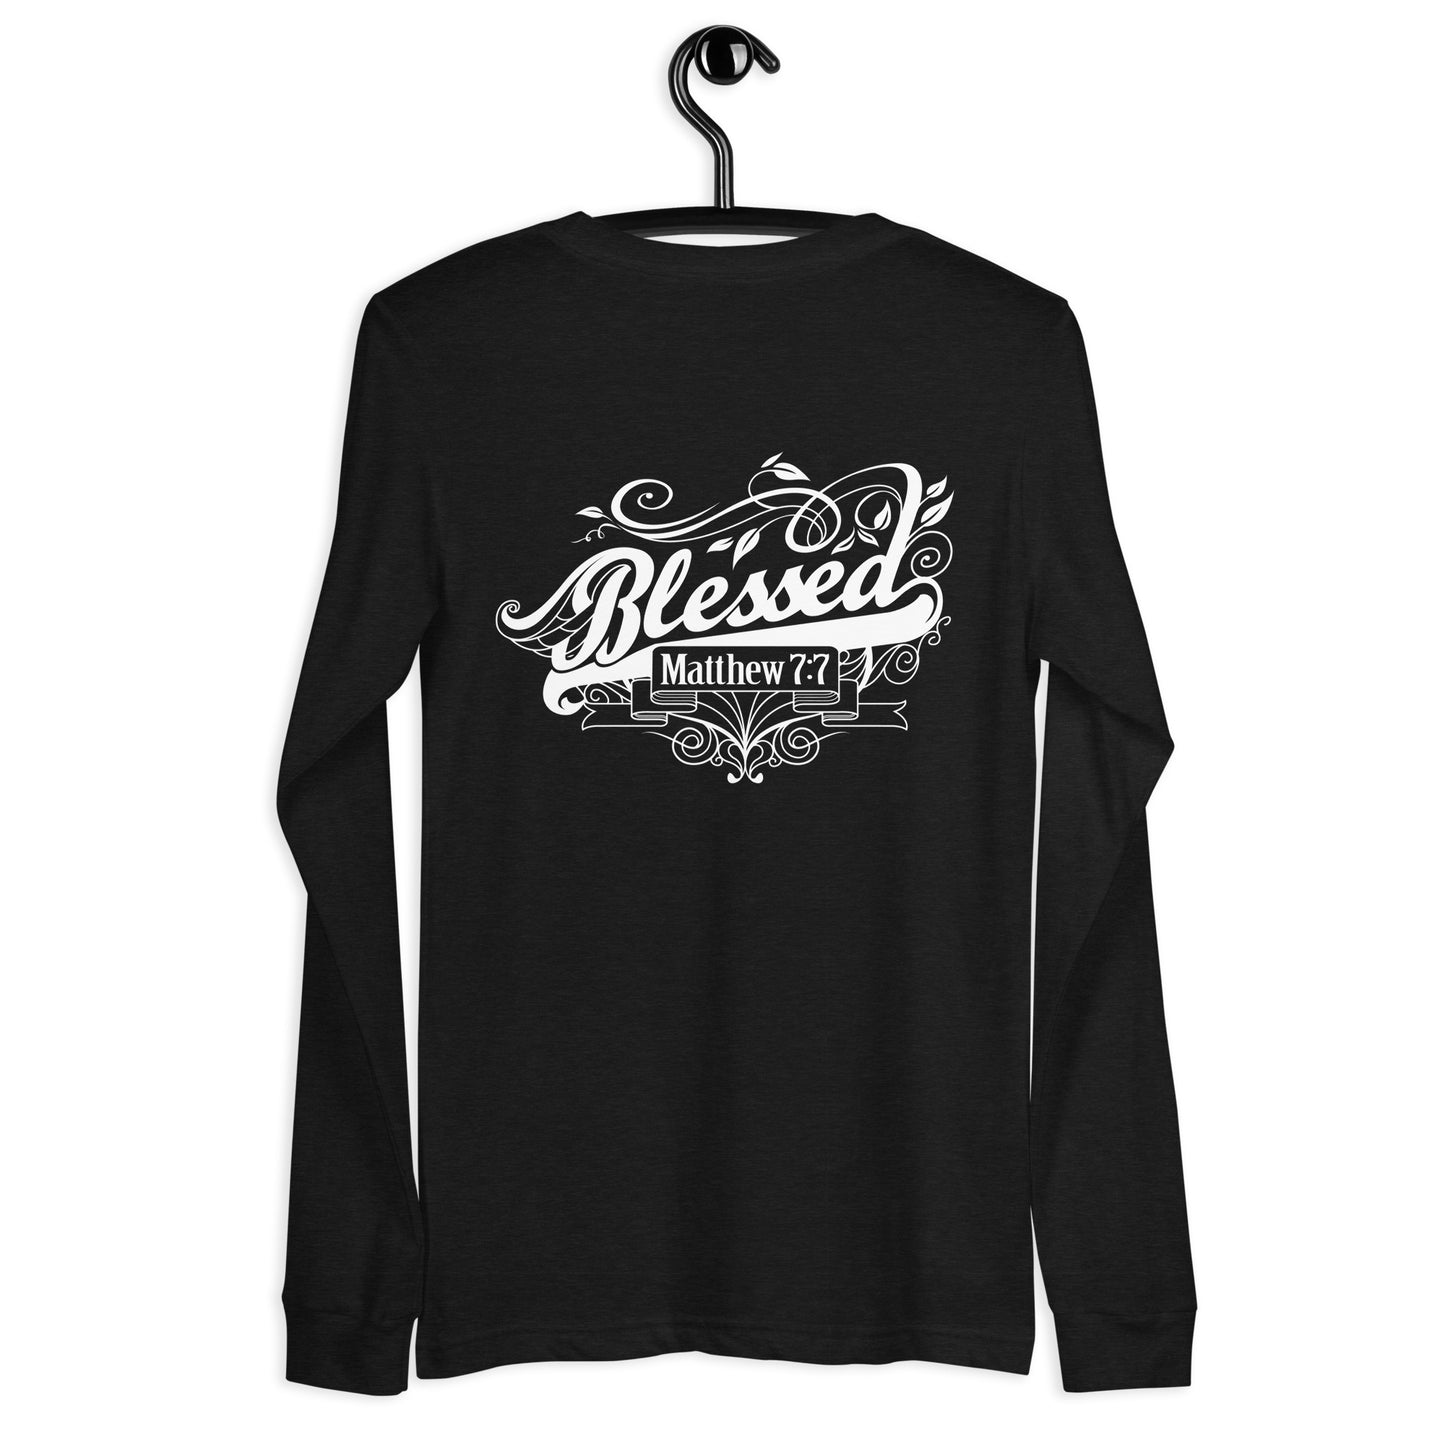 Blessed - Unisex Long Sleeve Tee - View All Colors